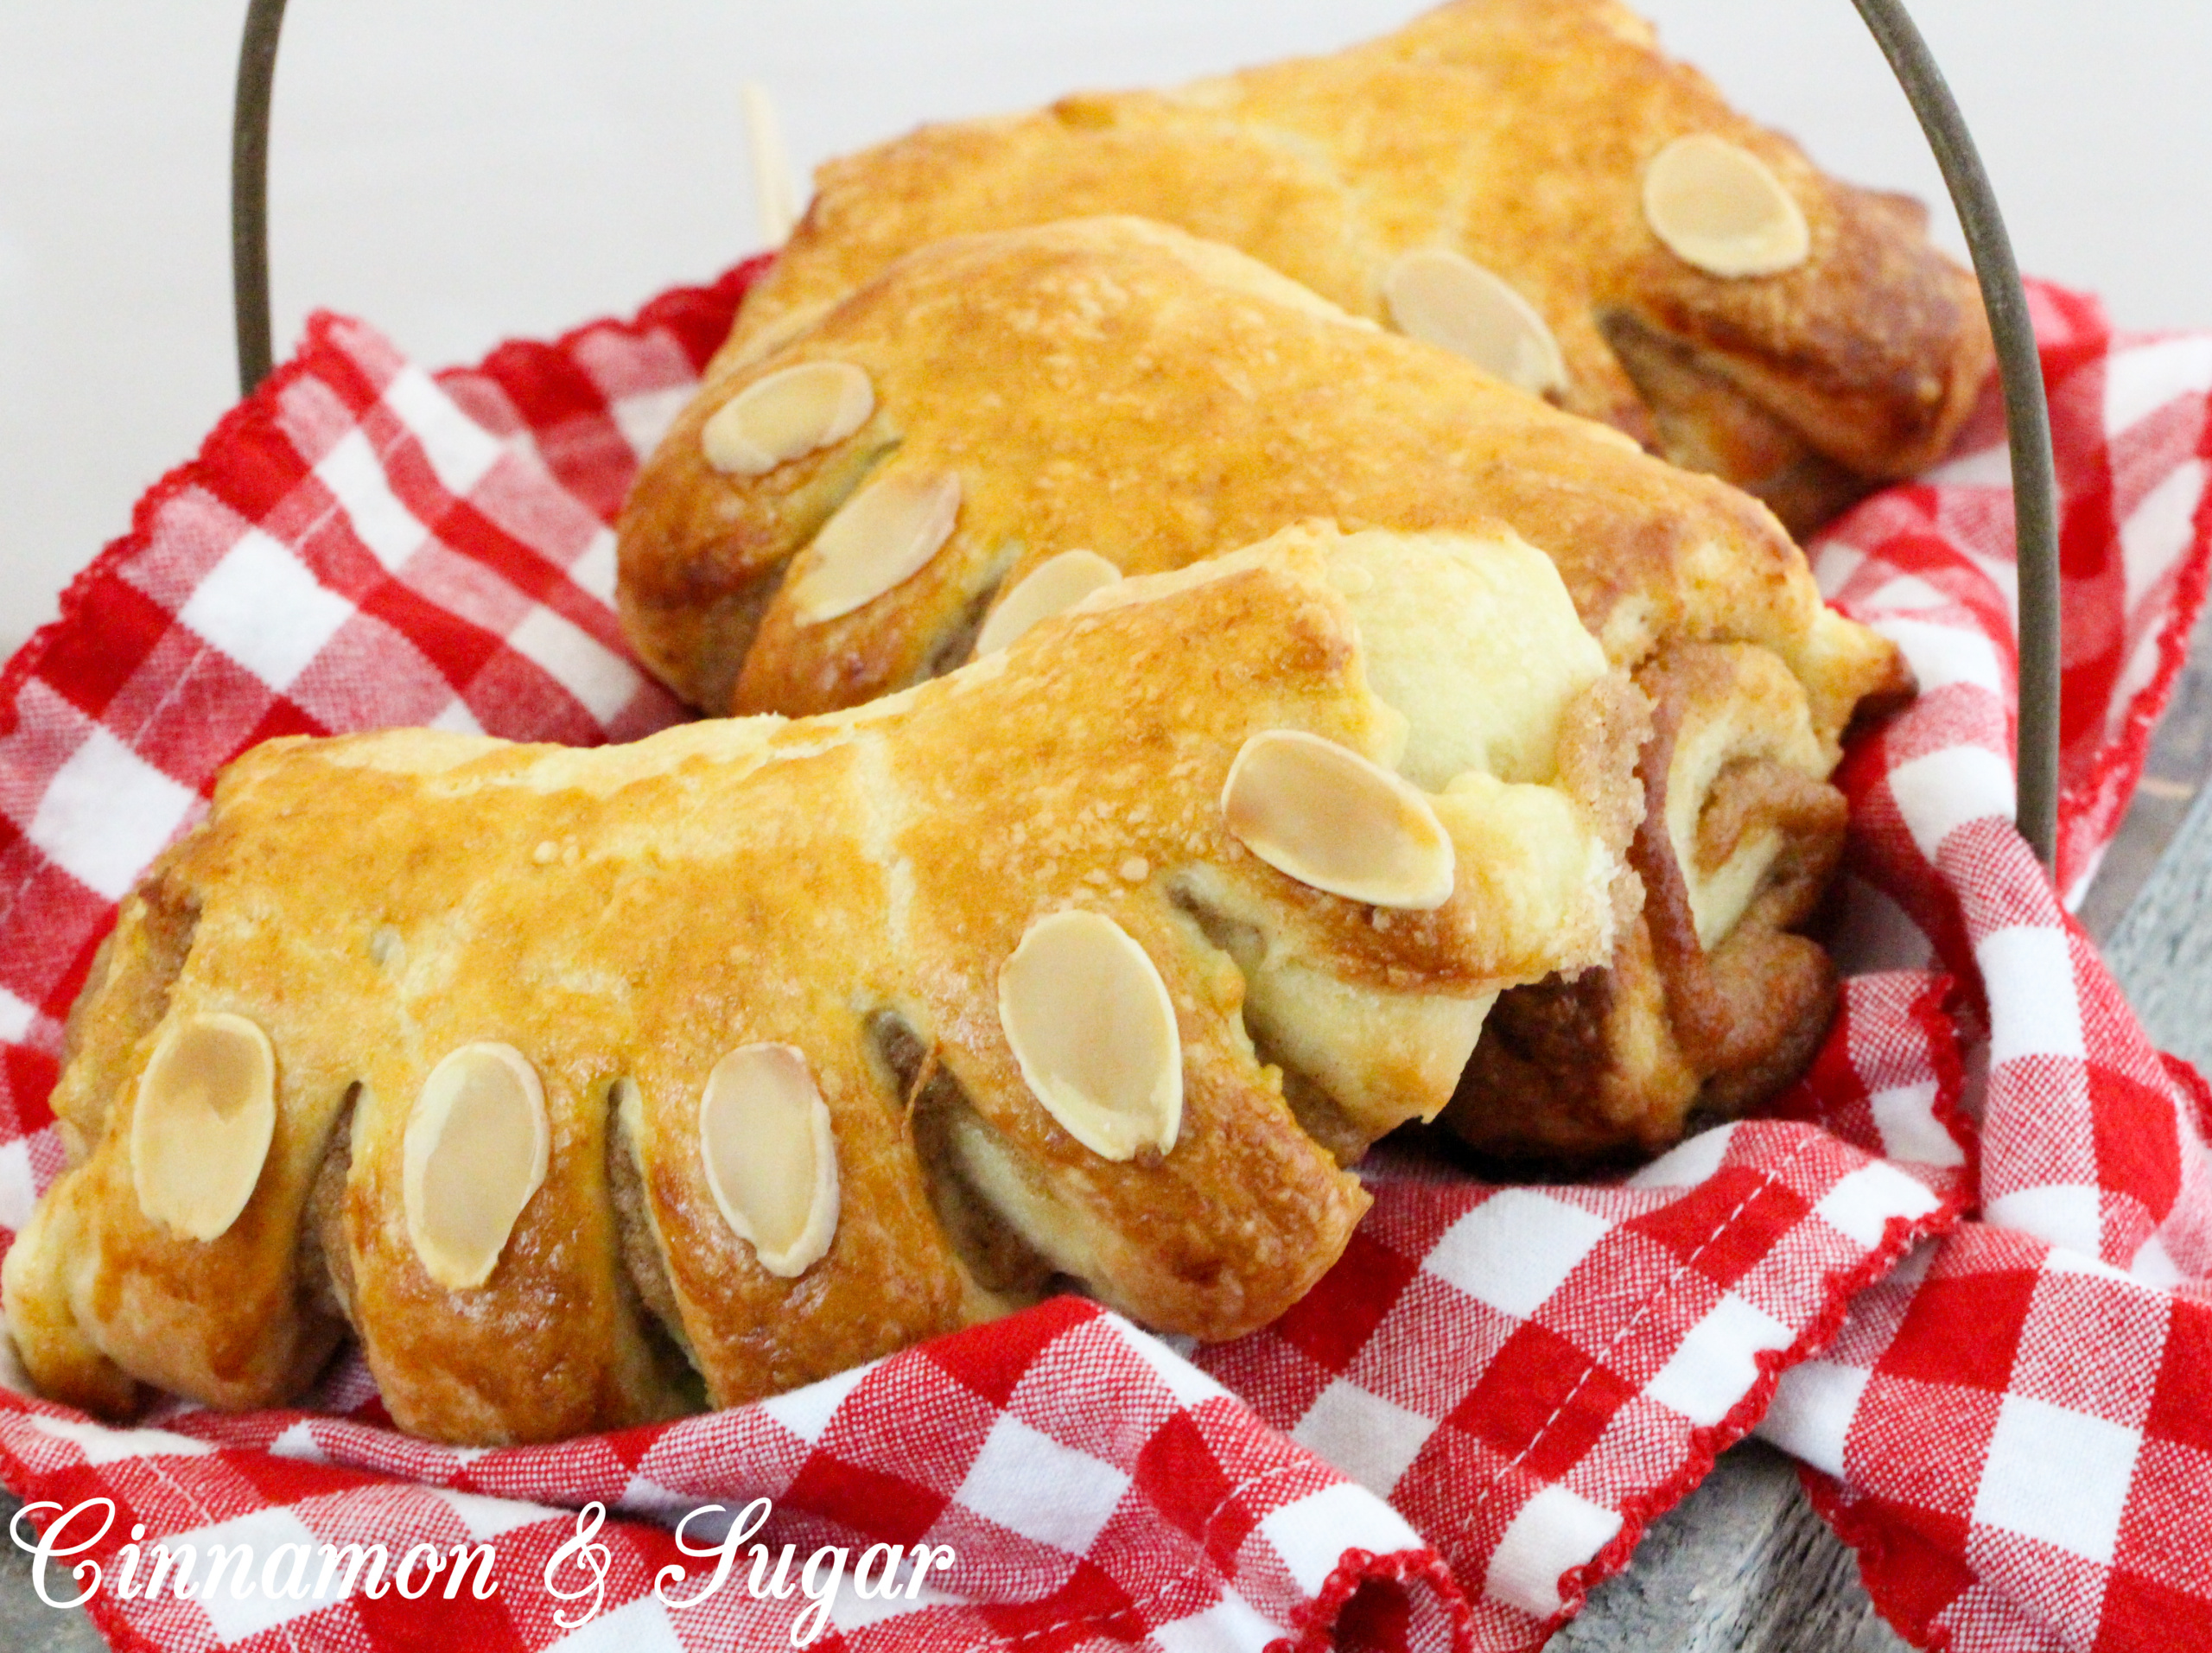 With flaky pastry encasing a sweet almond filling, these Almond Bear Claws are a scrumptious addition to breakfast, brunch, or coffee break! Recipe shared with permission granted by Elizabeth Logan, author of MOUSSE AND MURDER.